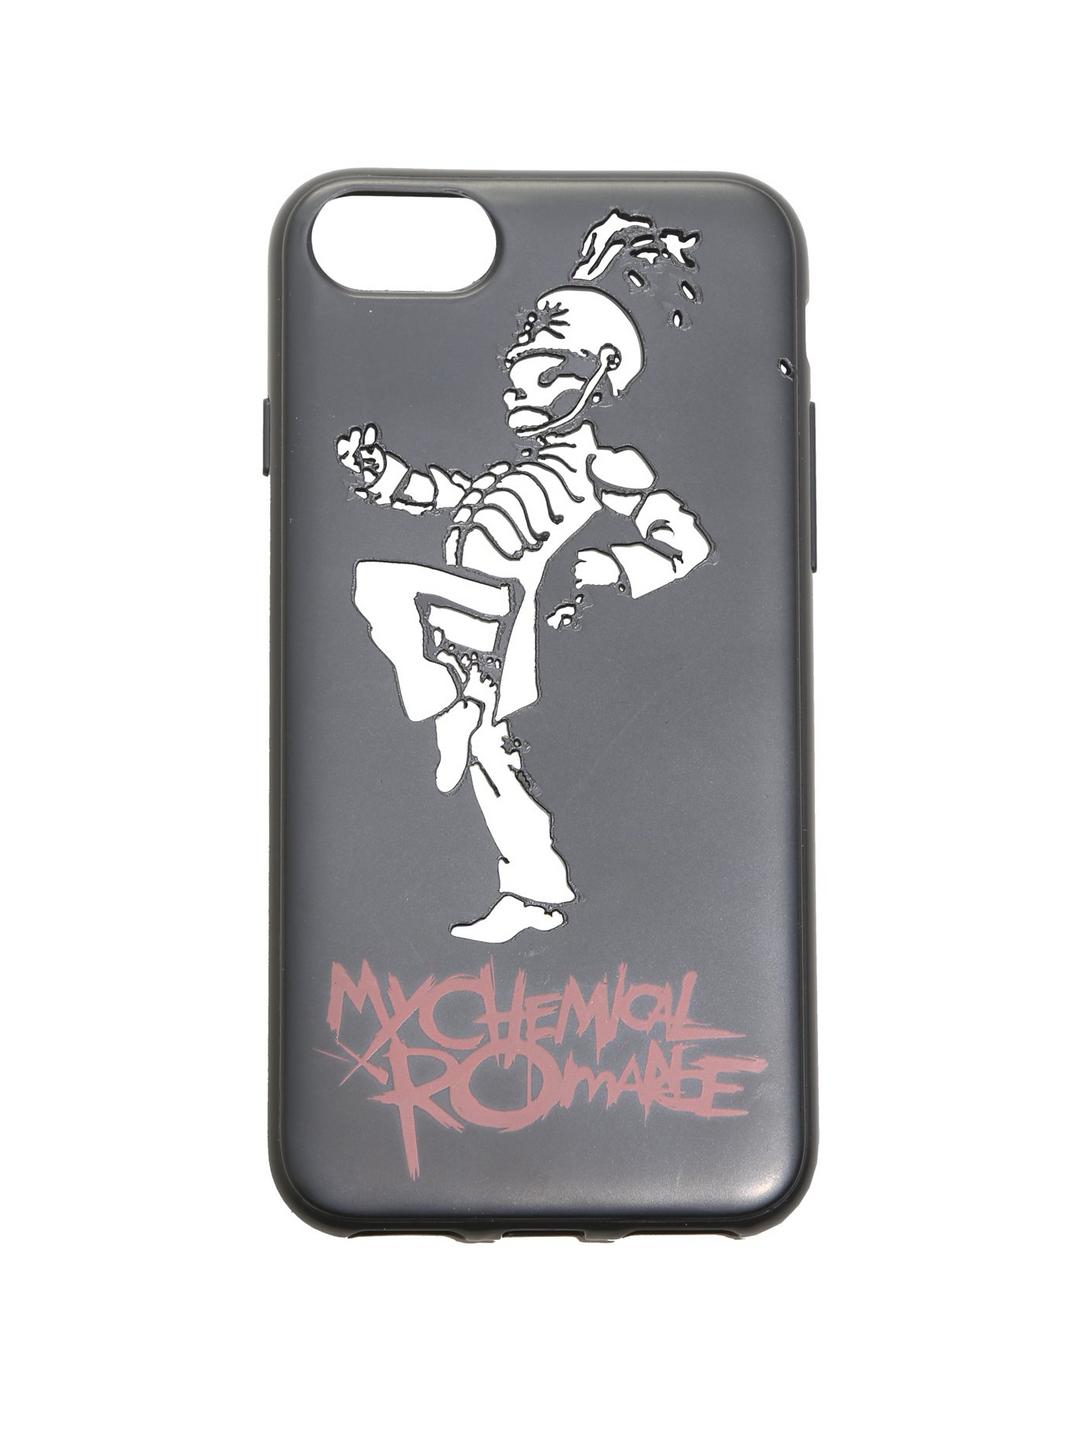 My Chemical Romance The Black Parade Laser Cut Hardshell iPhone 6/6s 7 Case, , hi-res